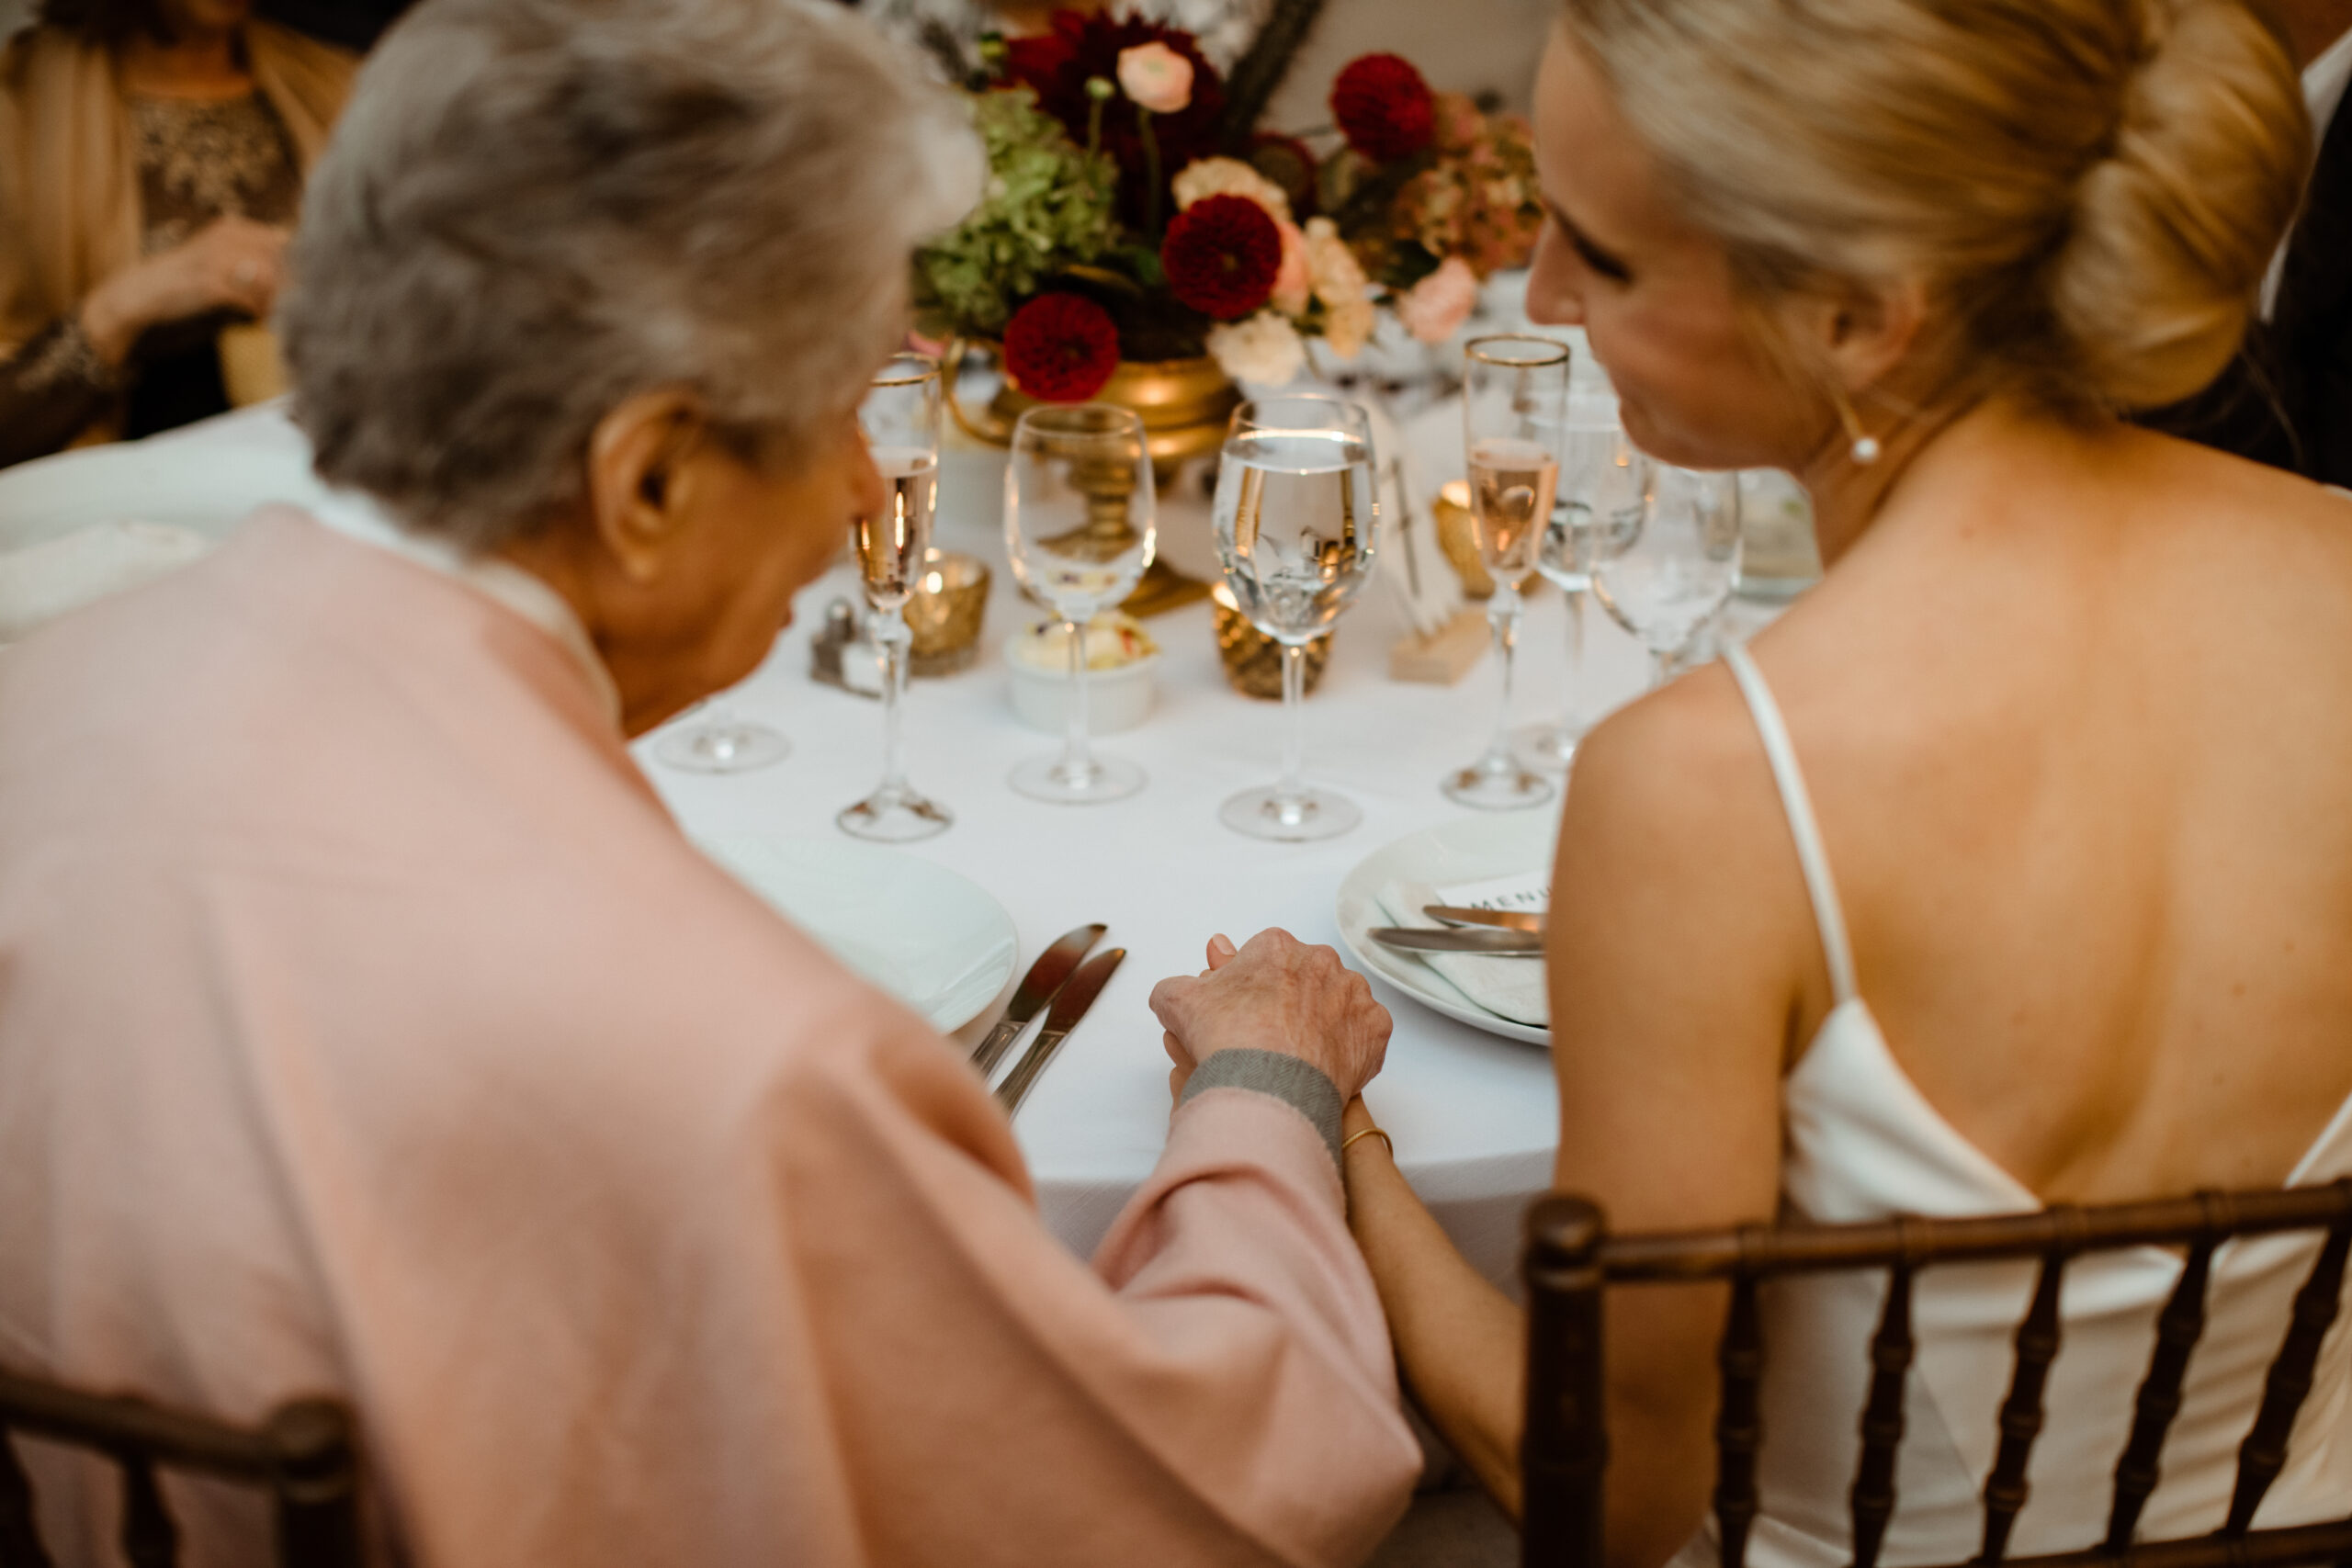 A touching moment between the bride and her grandmother on her wedding day